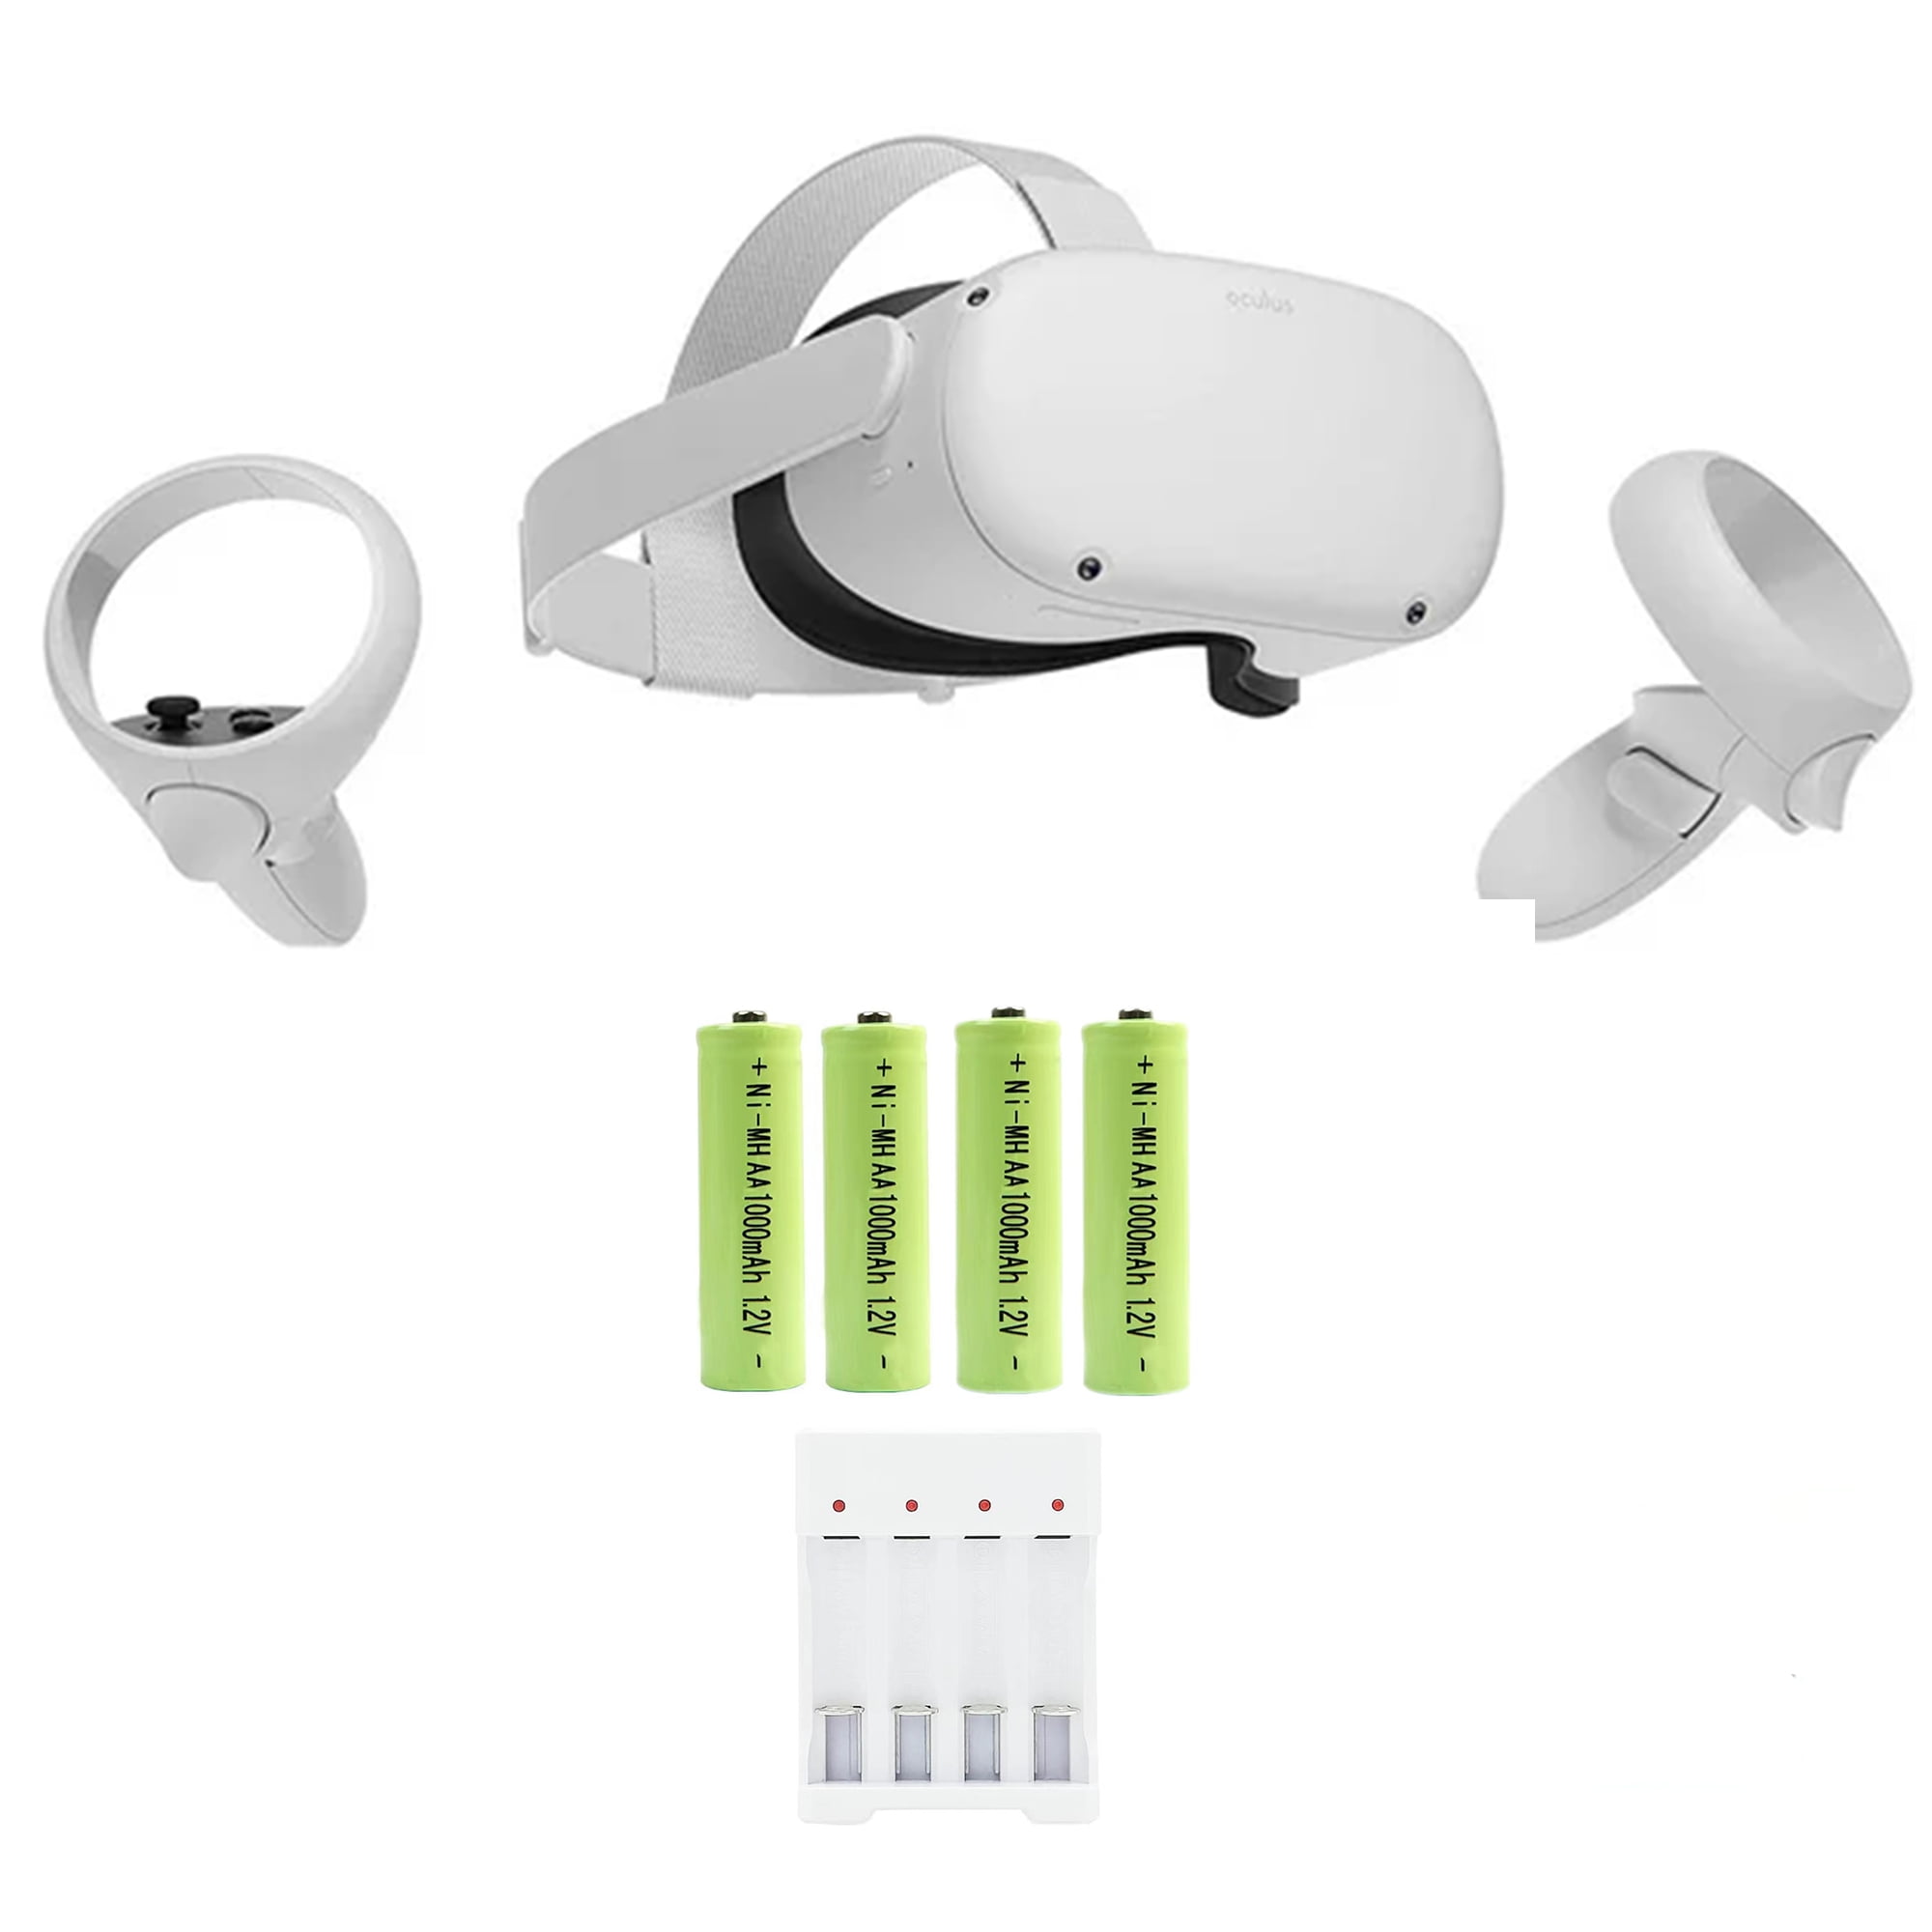 Oculus Quest 2 All-in-One Reality 128GB Gaming Headset, Touch Controllers, with 4 AA Rechargeable Batteries Charger Accessories Walmart.com